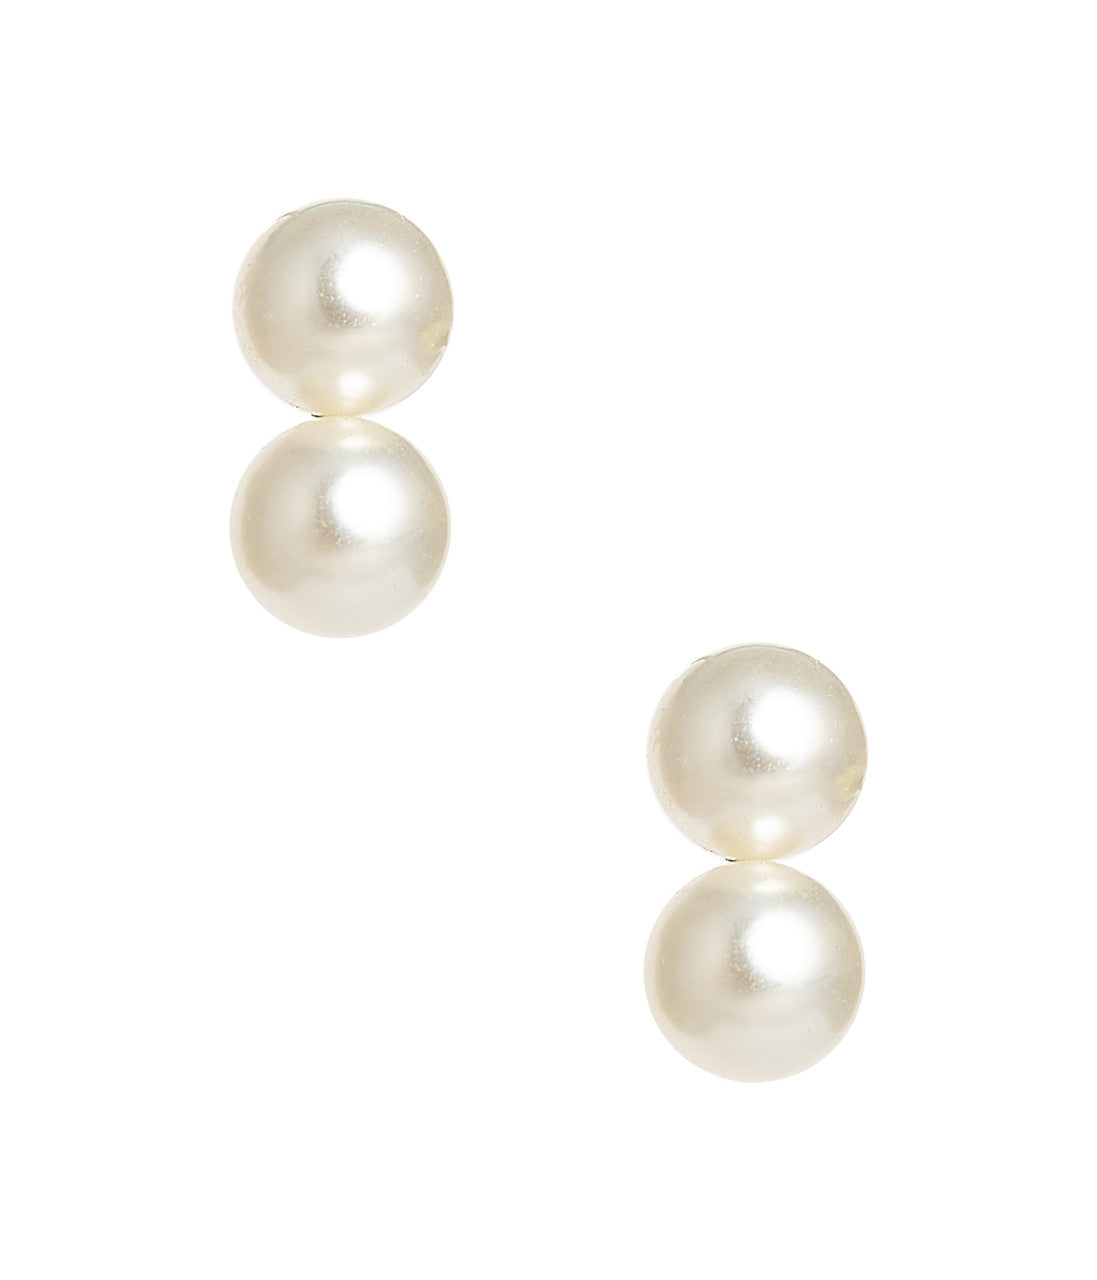 Large Belle - Double Pearl Earrings - Belle Of The Ball